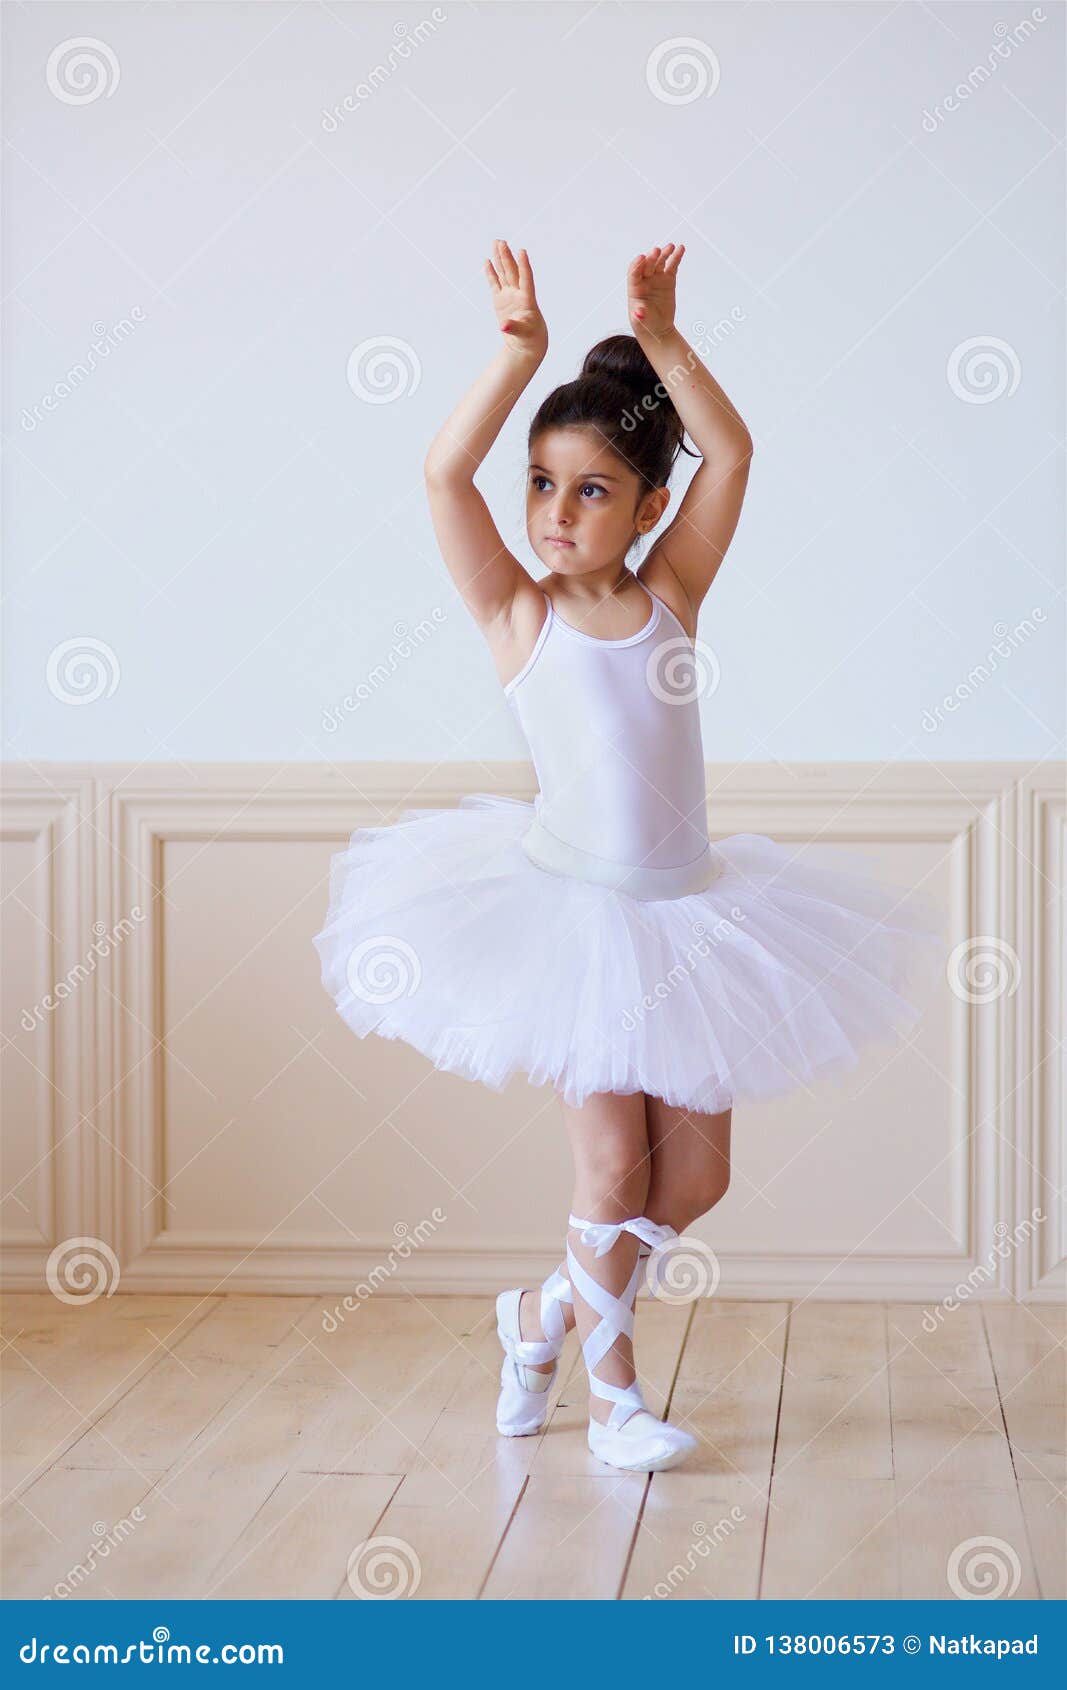 Little Girl in White Tutu Stock Image - Image of happiness, armenian: 138006573